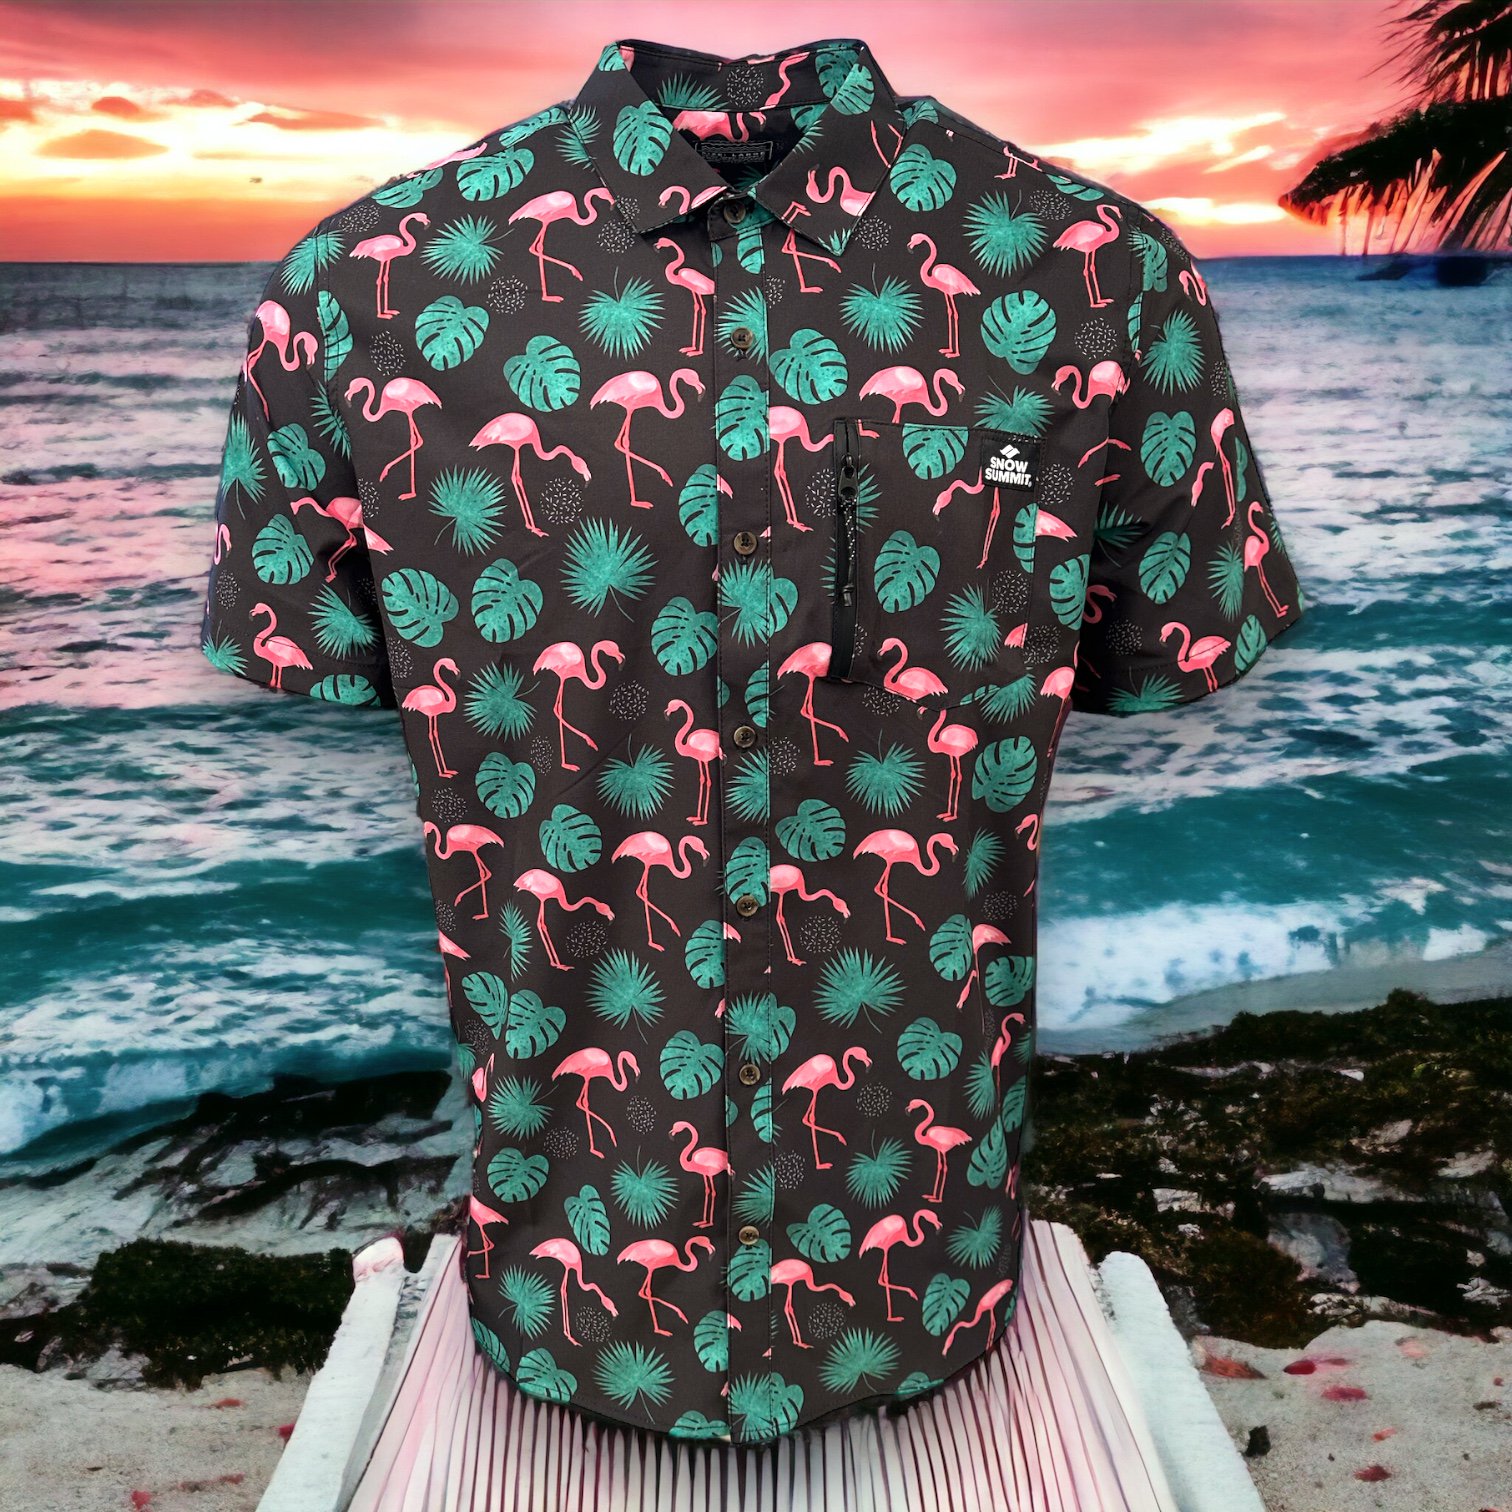 Snow Summit black button up dress shirt with pink flamingos and green tree leaves design